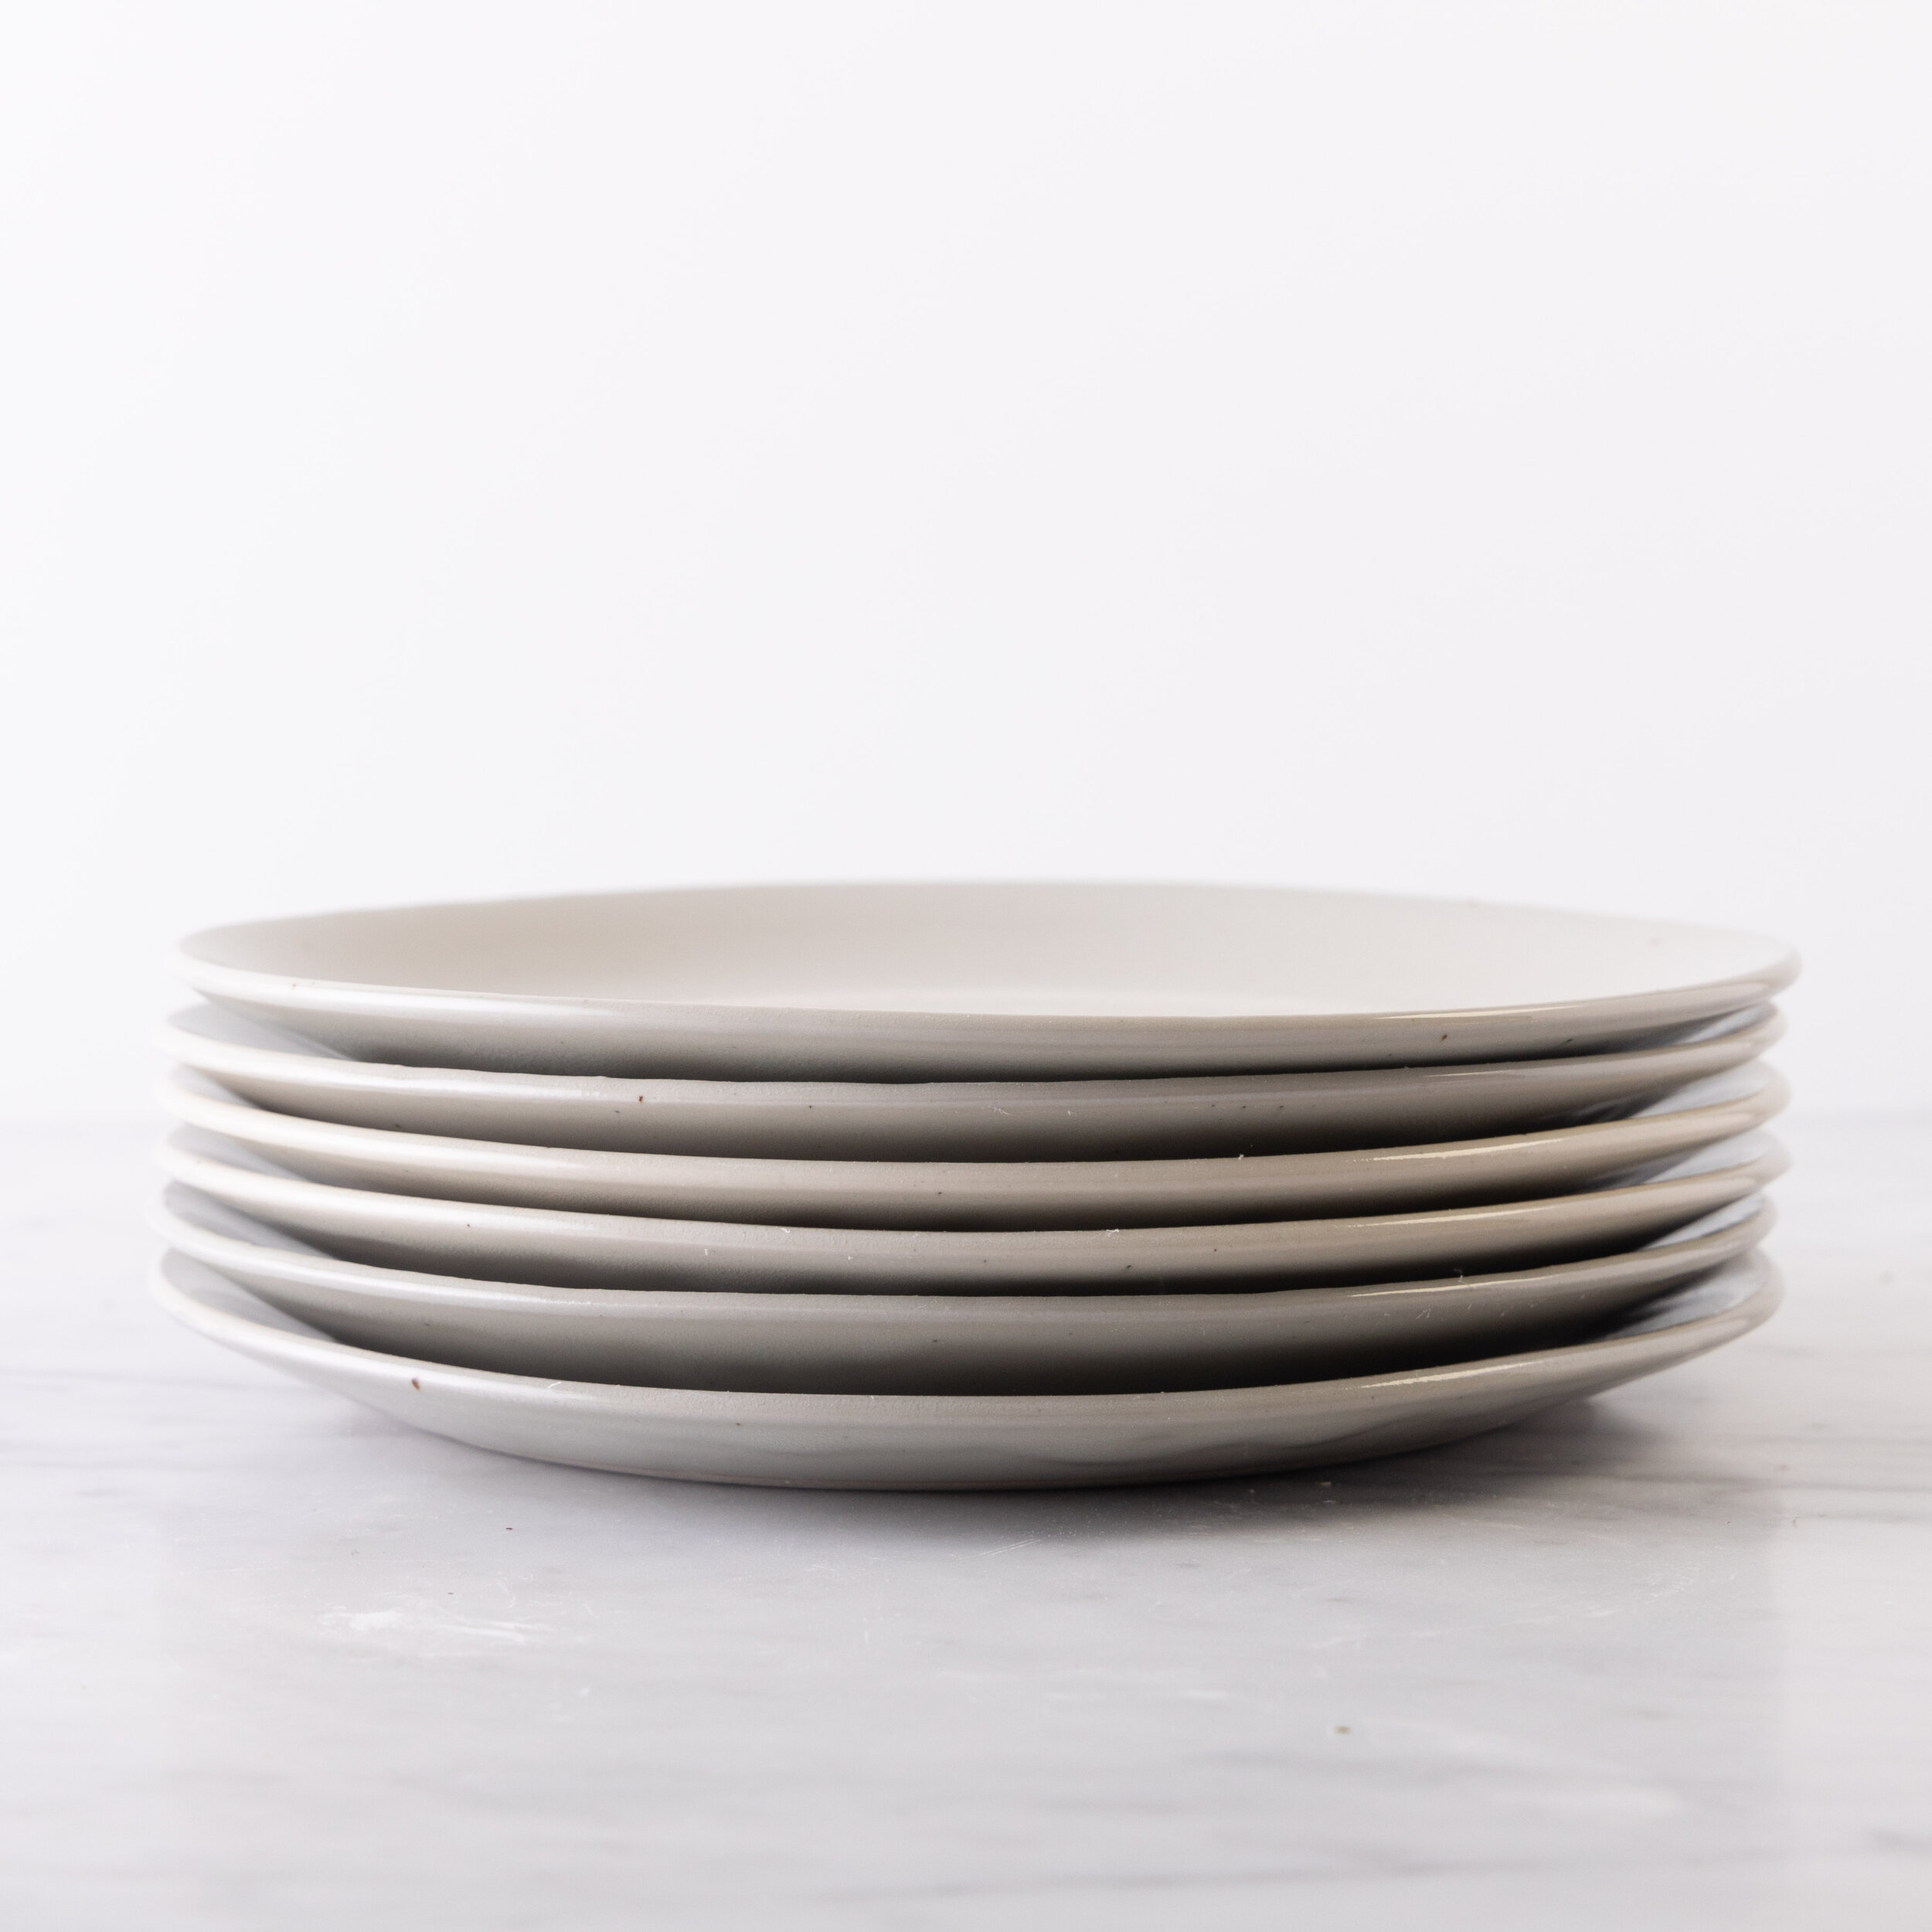 The two middle plates (shown in Mist Glaze) are slightly lighter than the others.  These color differences are acceptable. The shift in the form of the plates pictures is also acceptable.